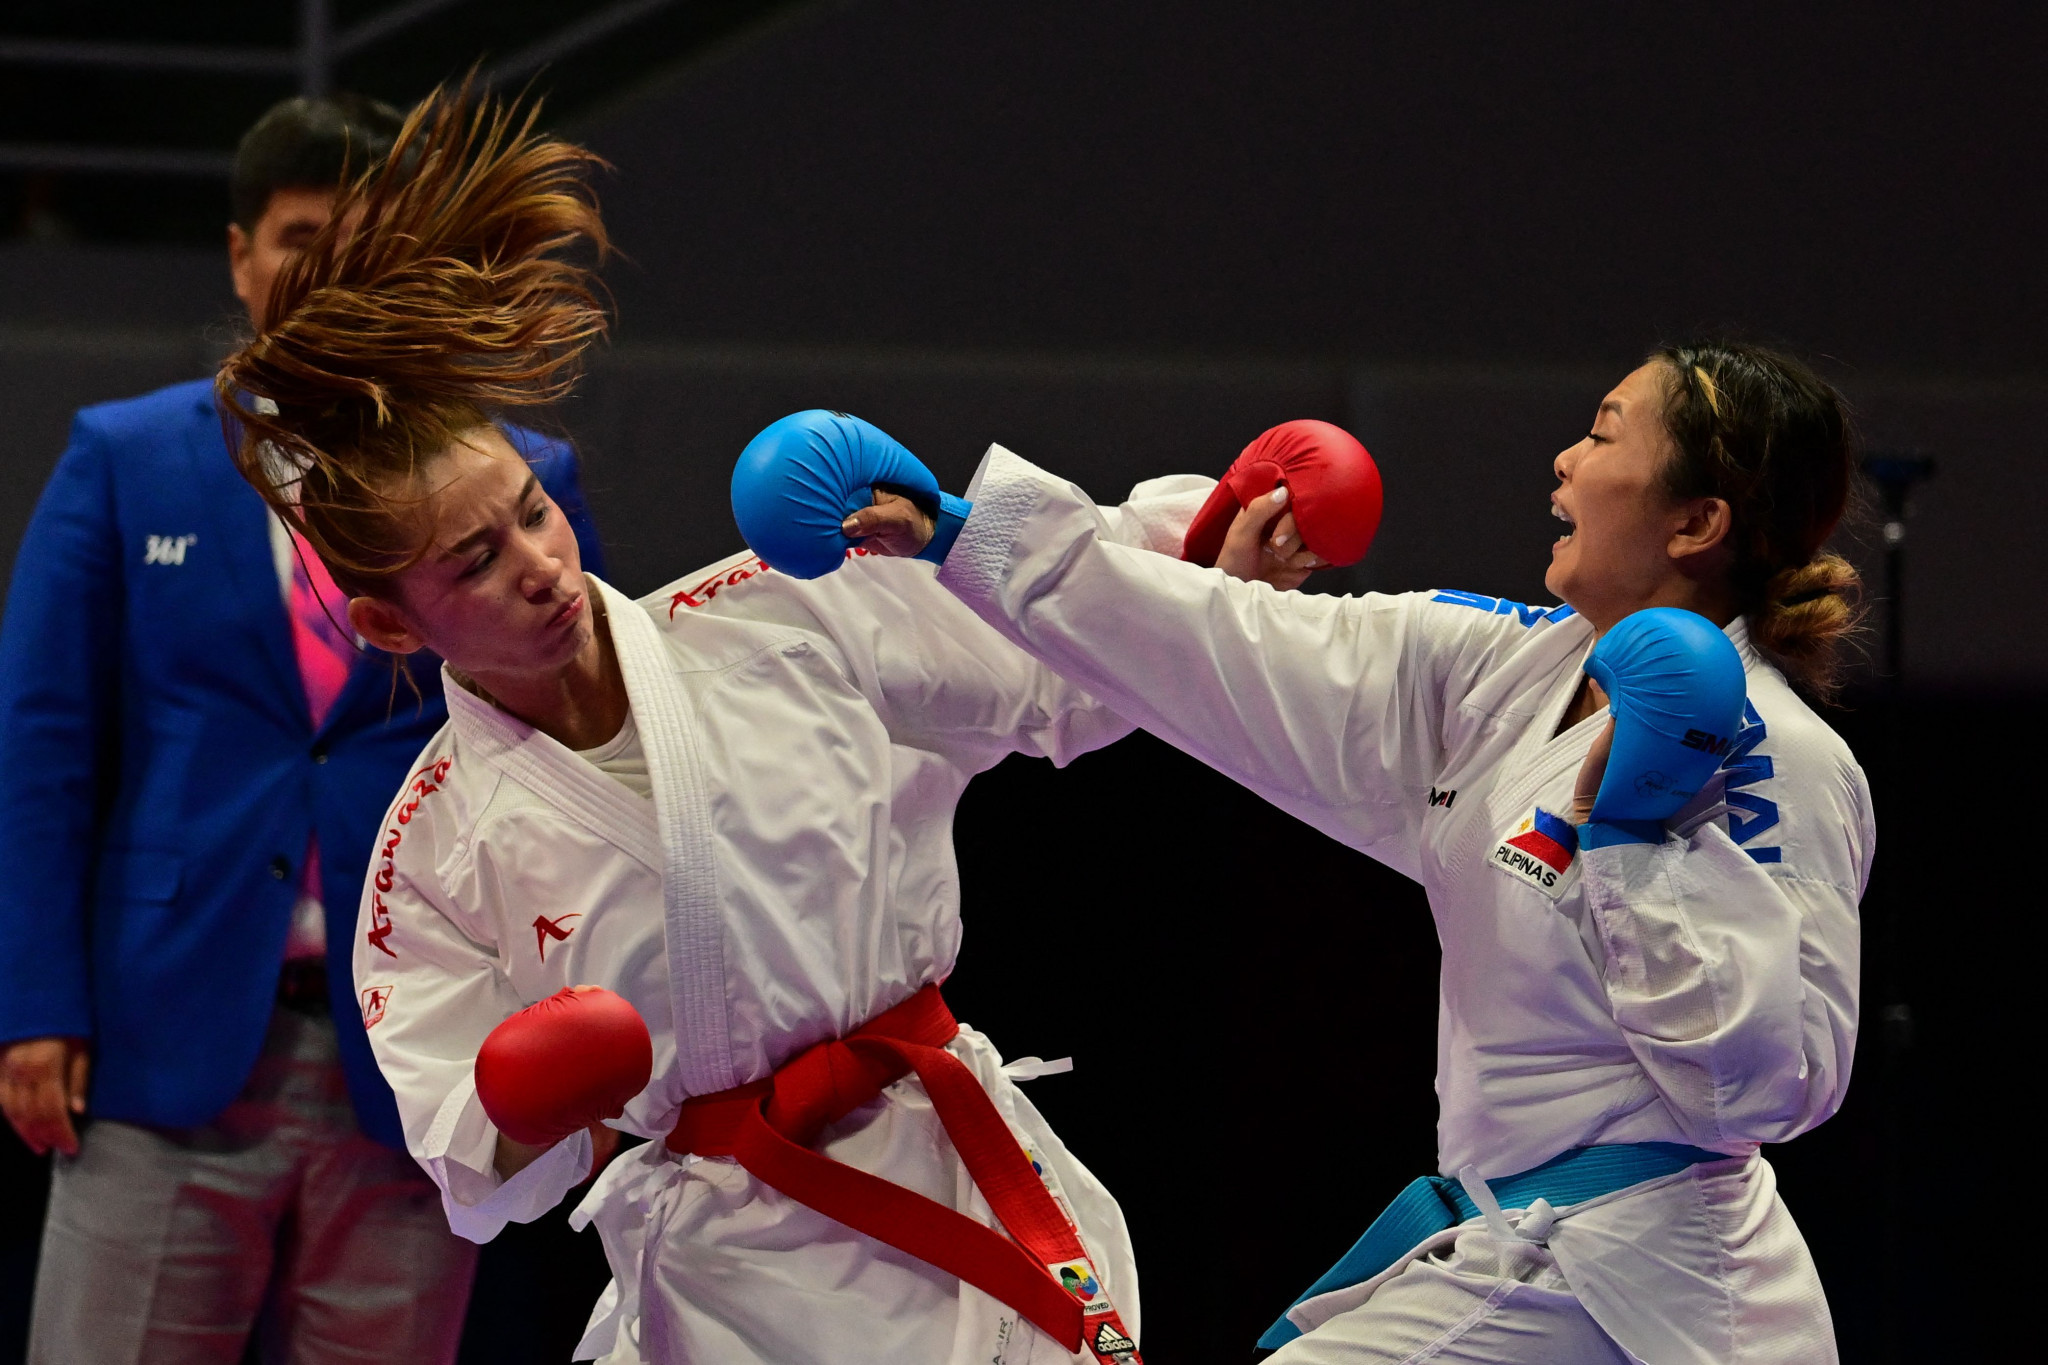 Karate made its debut at Tokyo 2020 but has failed to seal a spot at Paris 2024 and Los Angeles 2028 ©Getty Images